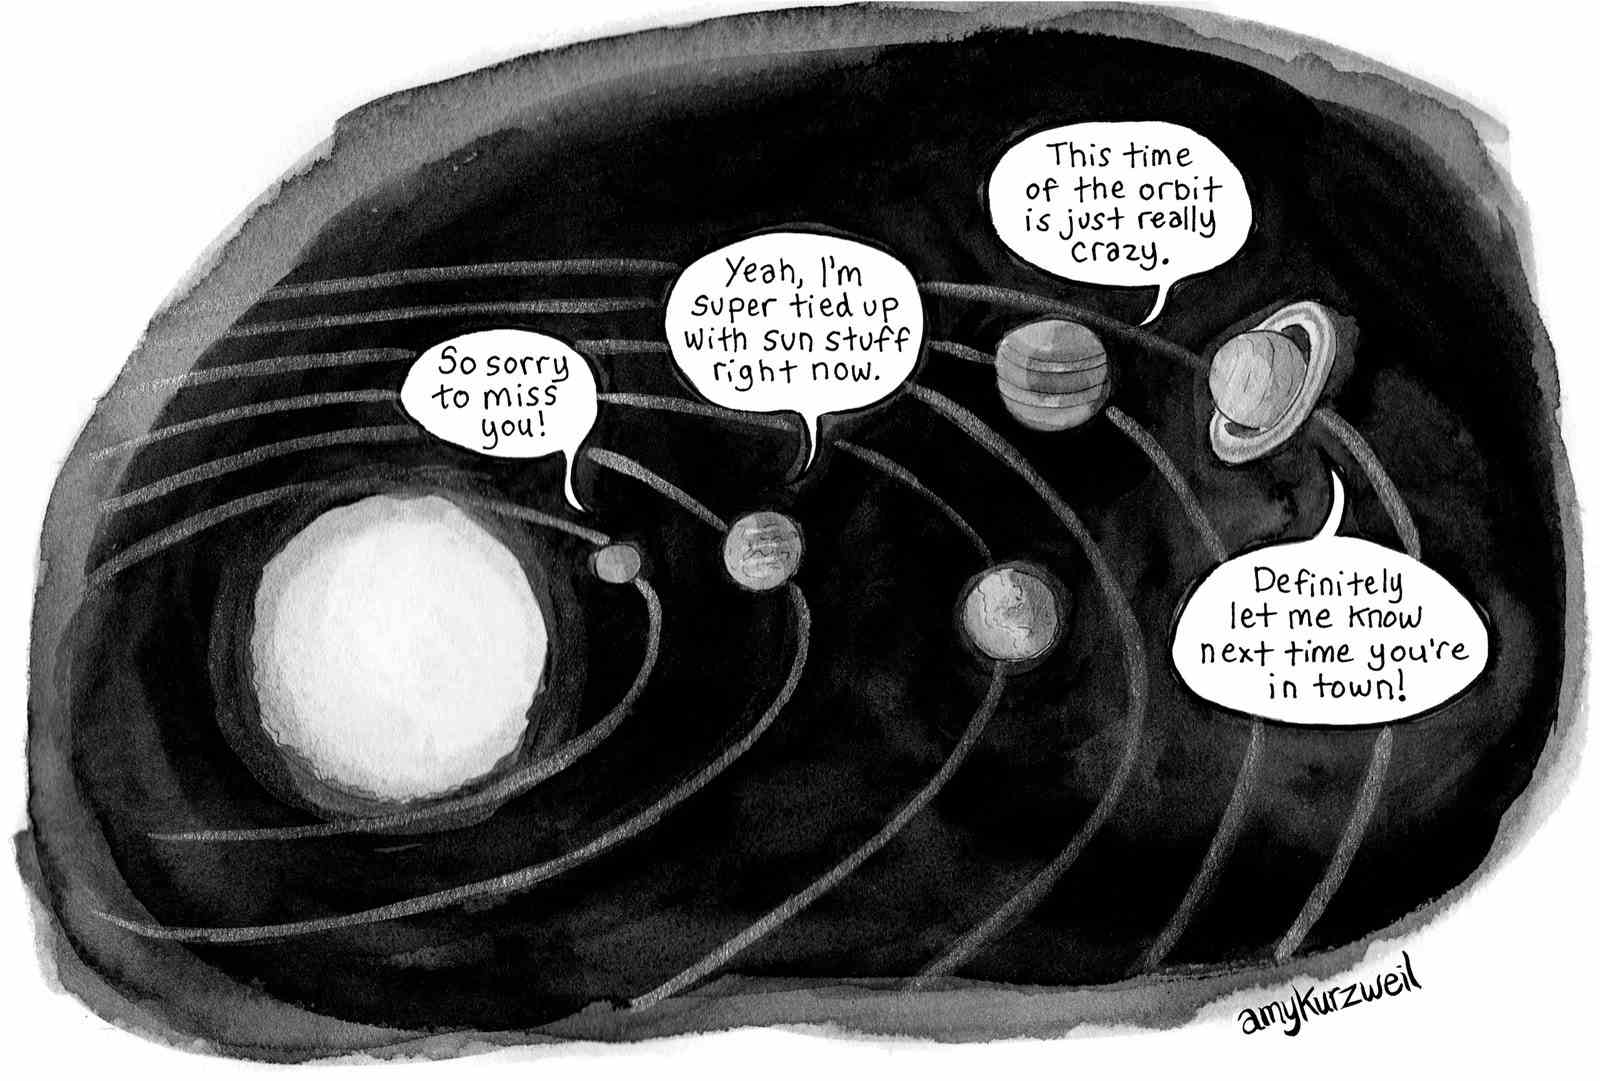 Our solar system with planets giving excuses for being too busy to make plans.